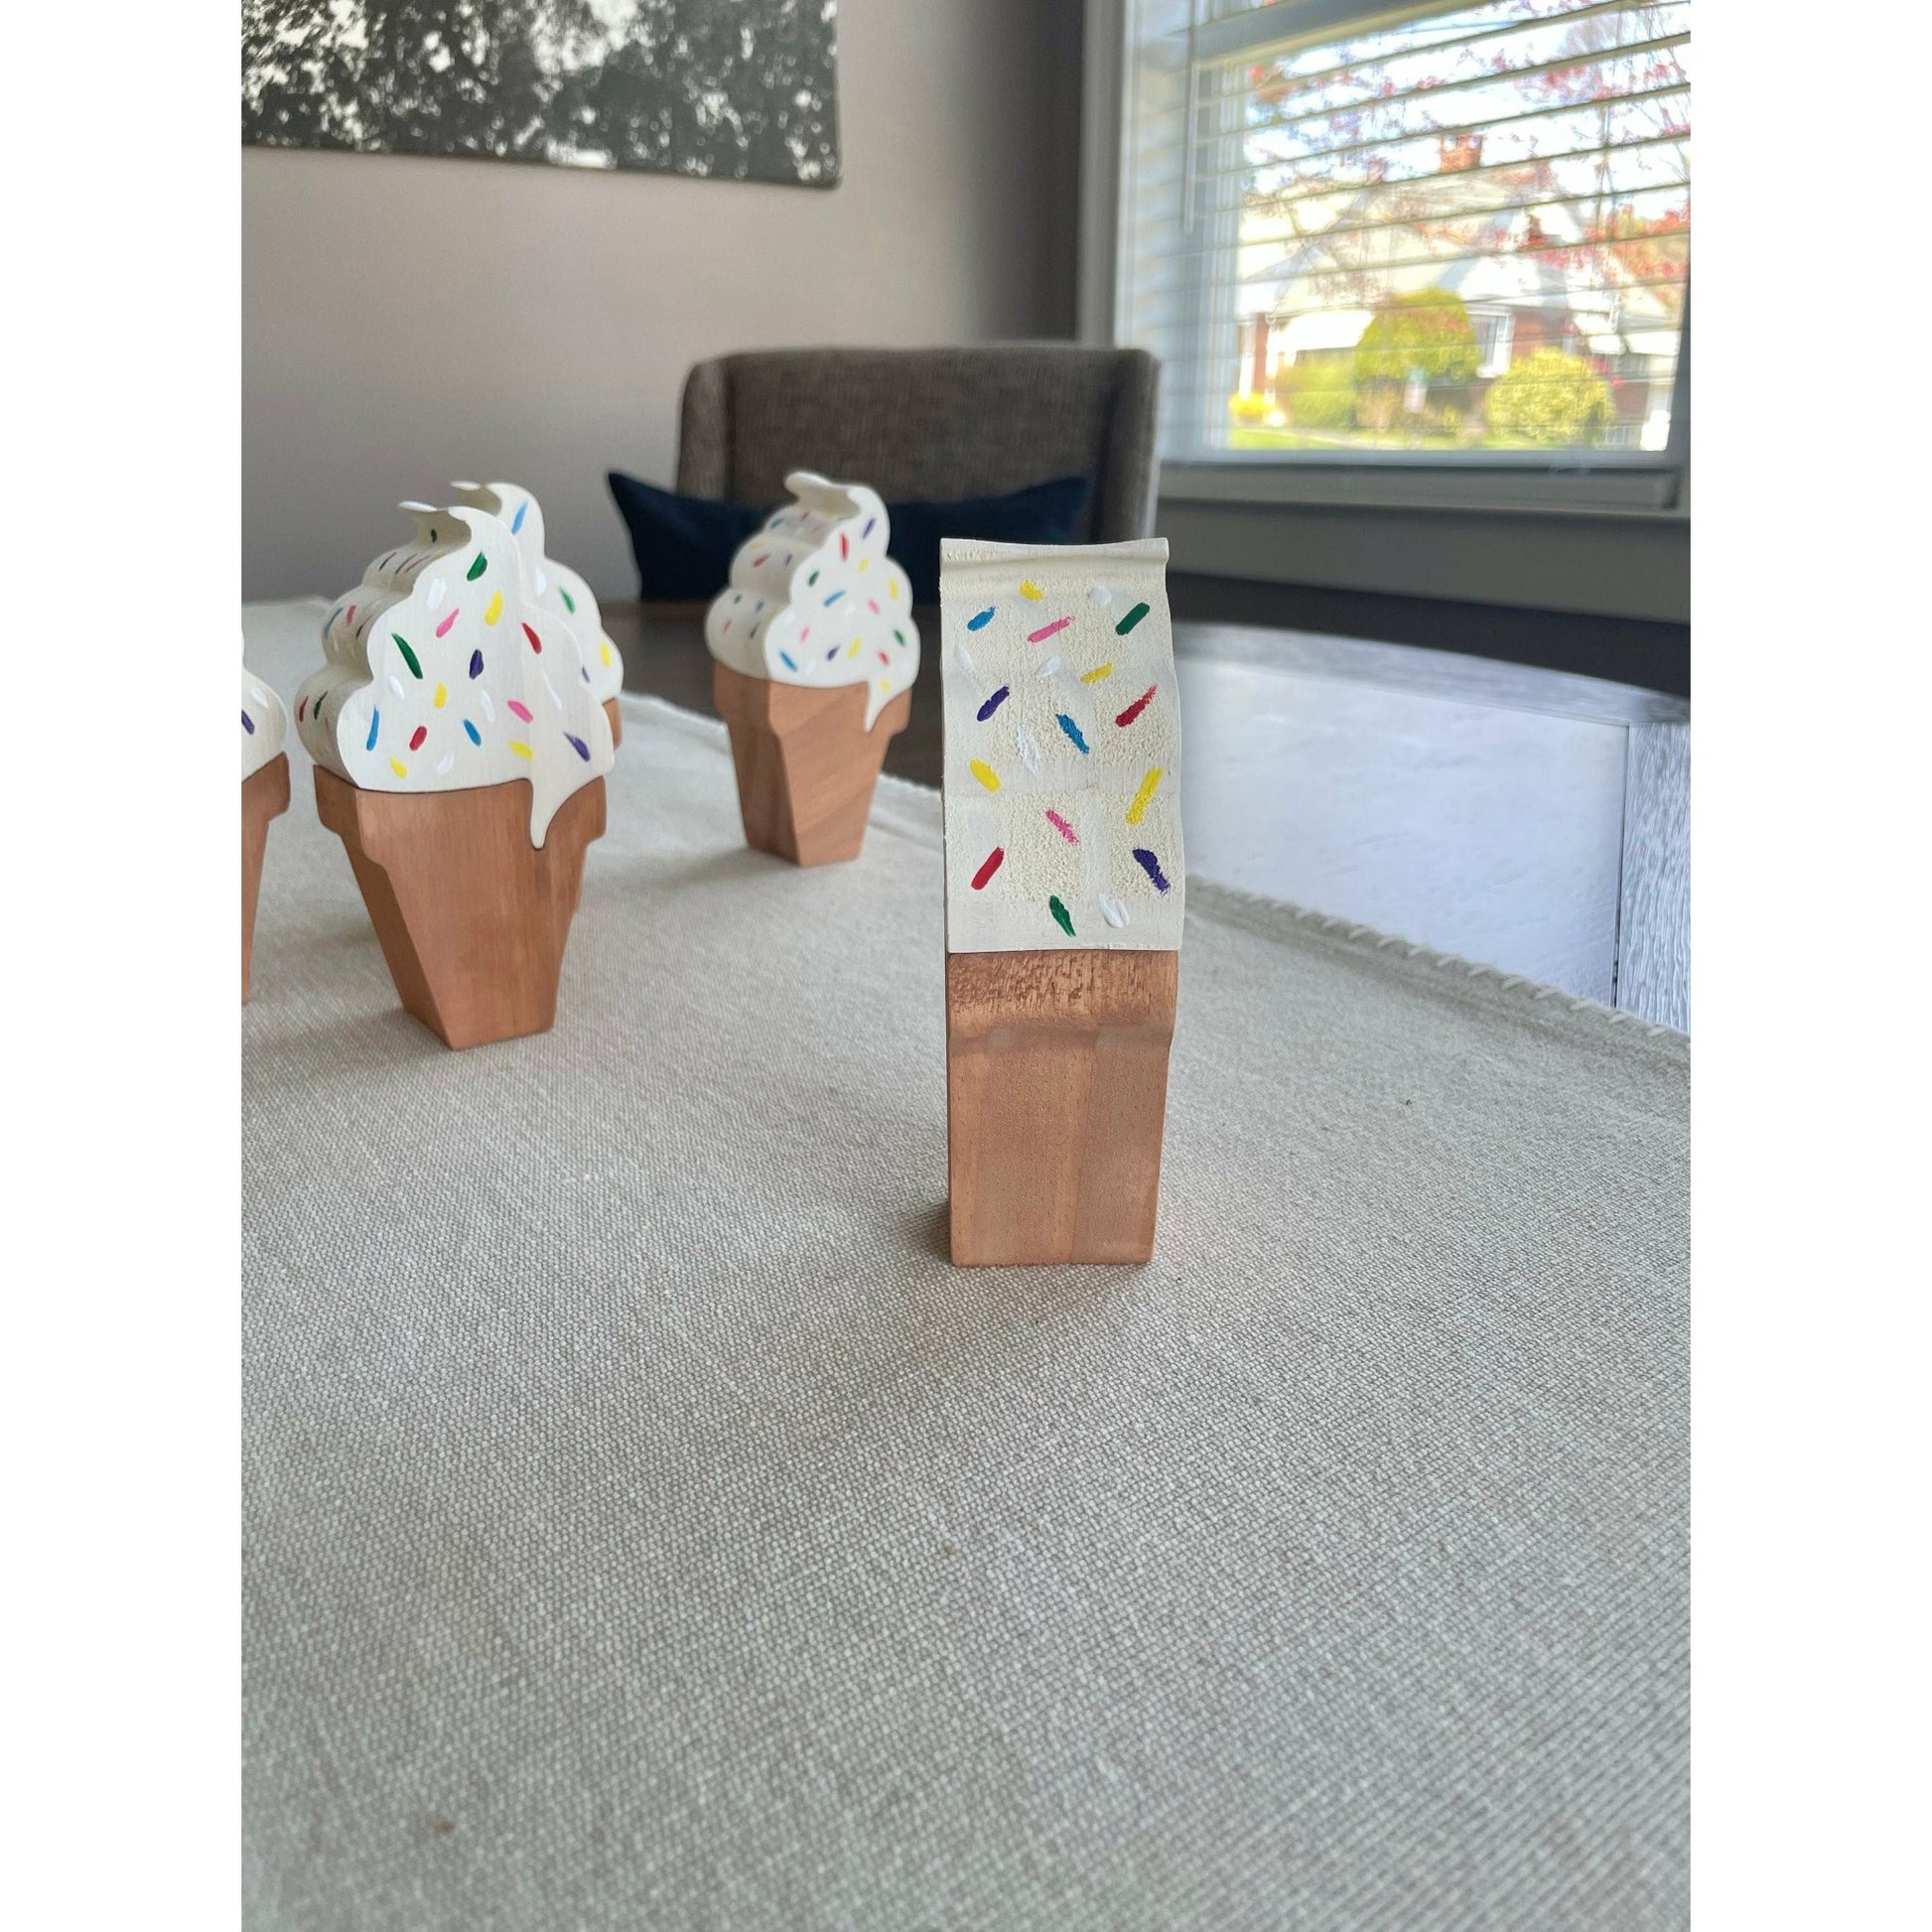 Wood Ice Cream Cone with Sprinkles Summer Decor